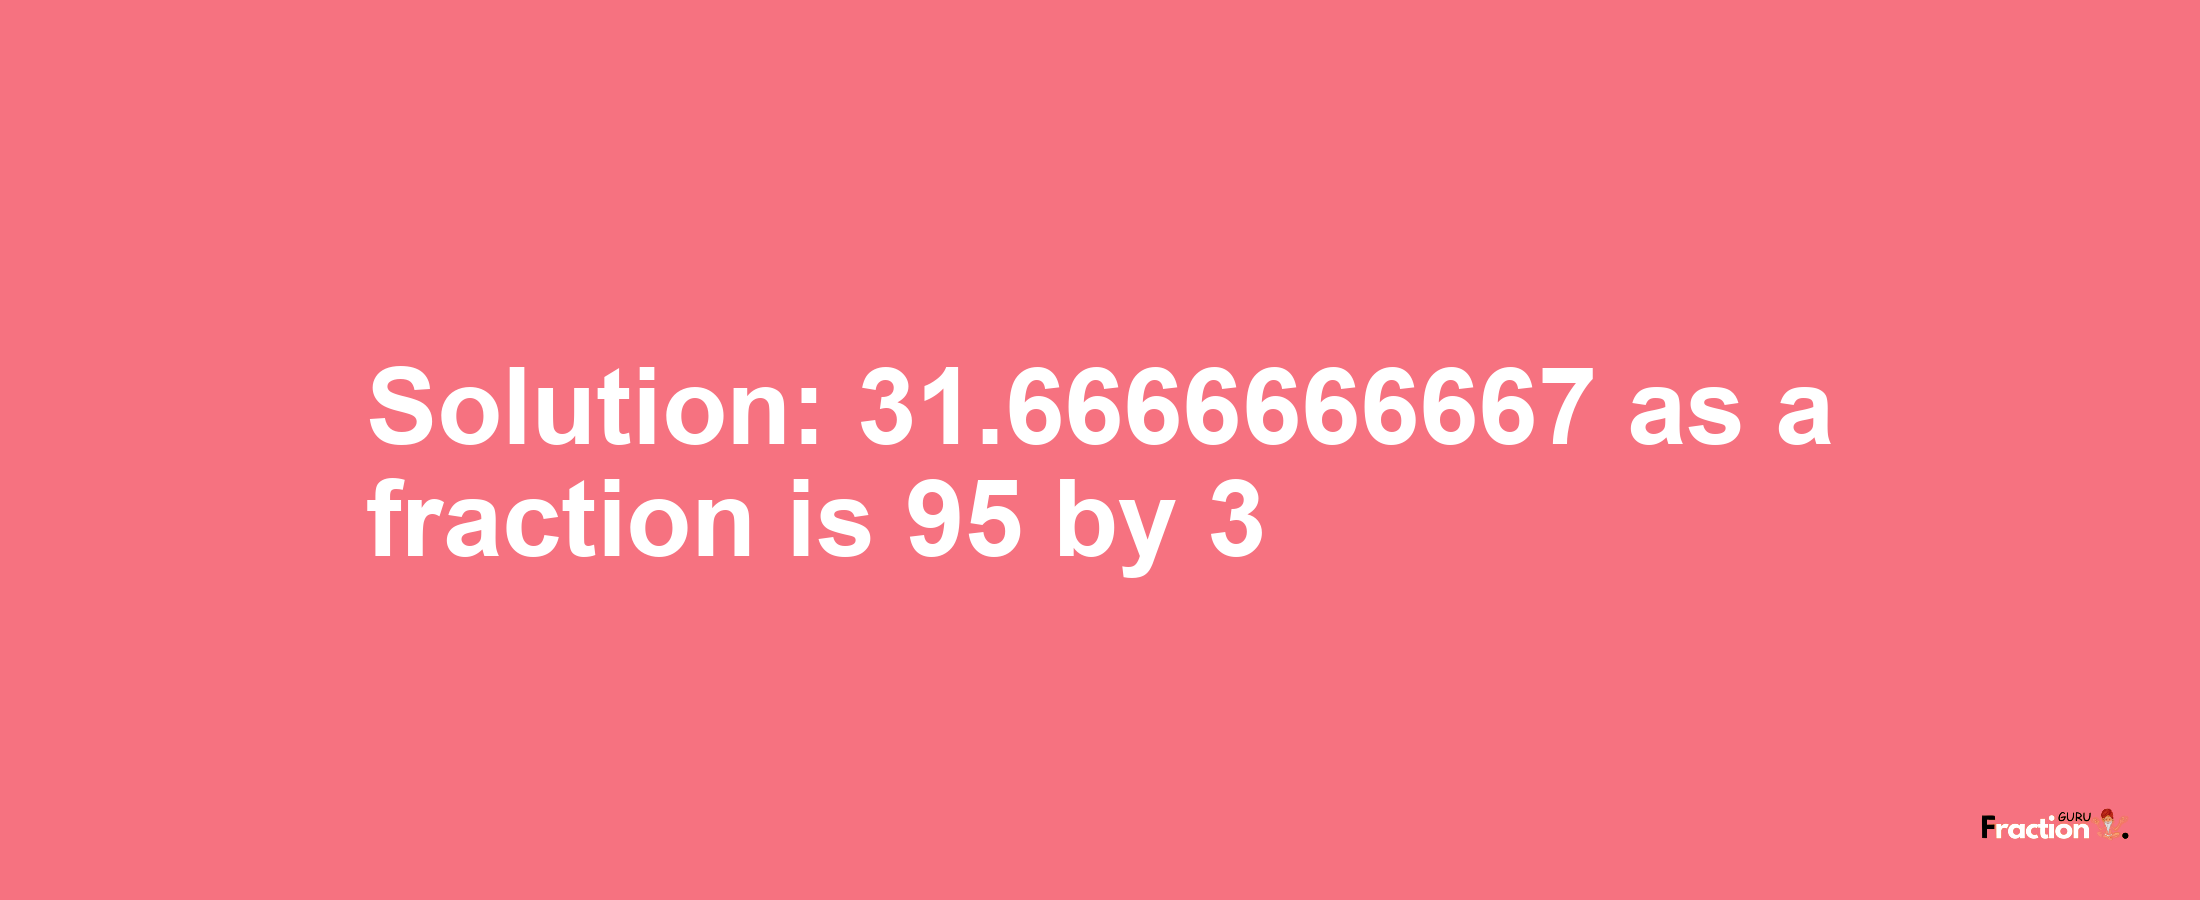 Solution:31.6666666667 as a fraction is 95/3